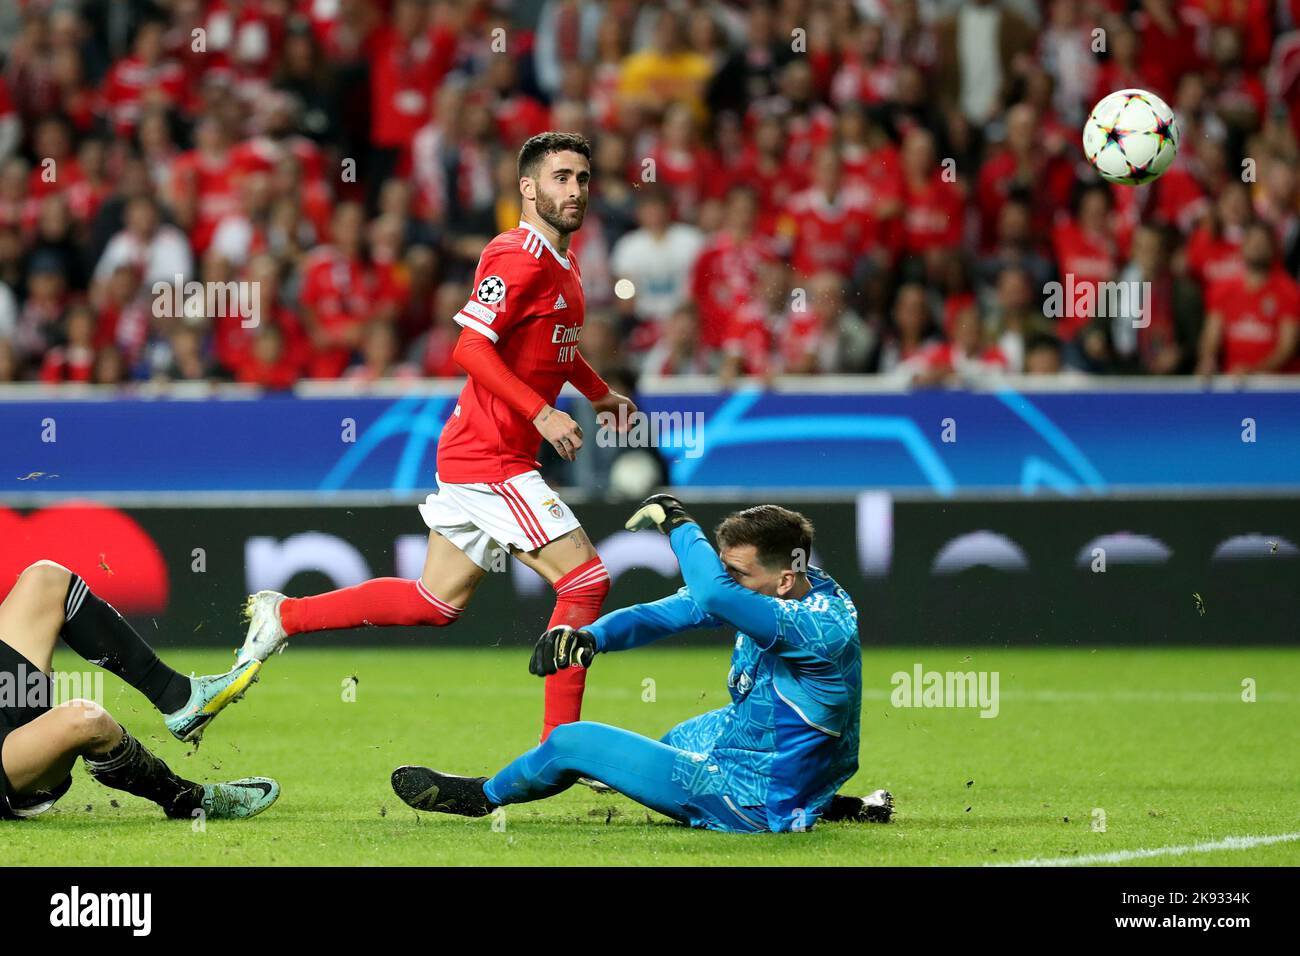 Lisbon, Portugal. 25th Oct, 2022. Rafa Silva (L) of Benfica scores during the UEFA Champions League group H match between SL Benfica and Juventus in Lisbon, Portugal, on Oct. 25, 2022. Credit: Pedro Fiuza/Xinhua/Alamy Live News Stock Photo